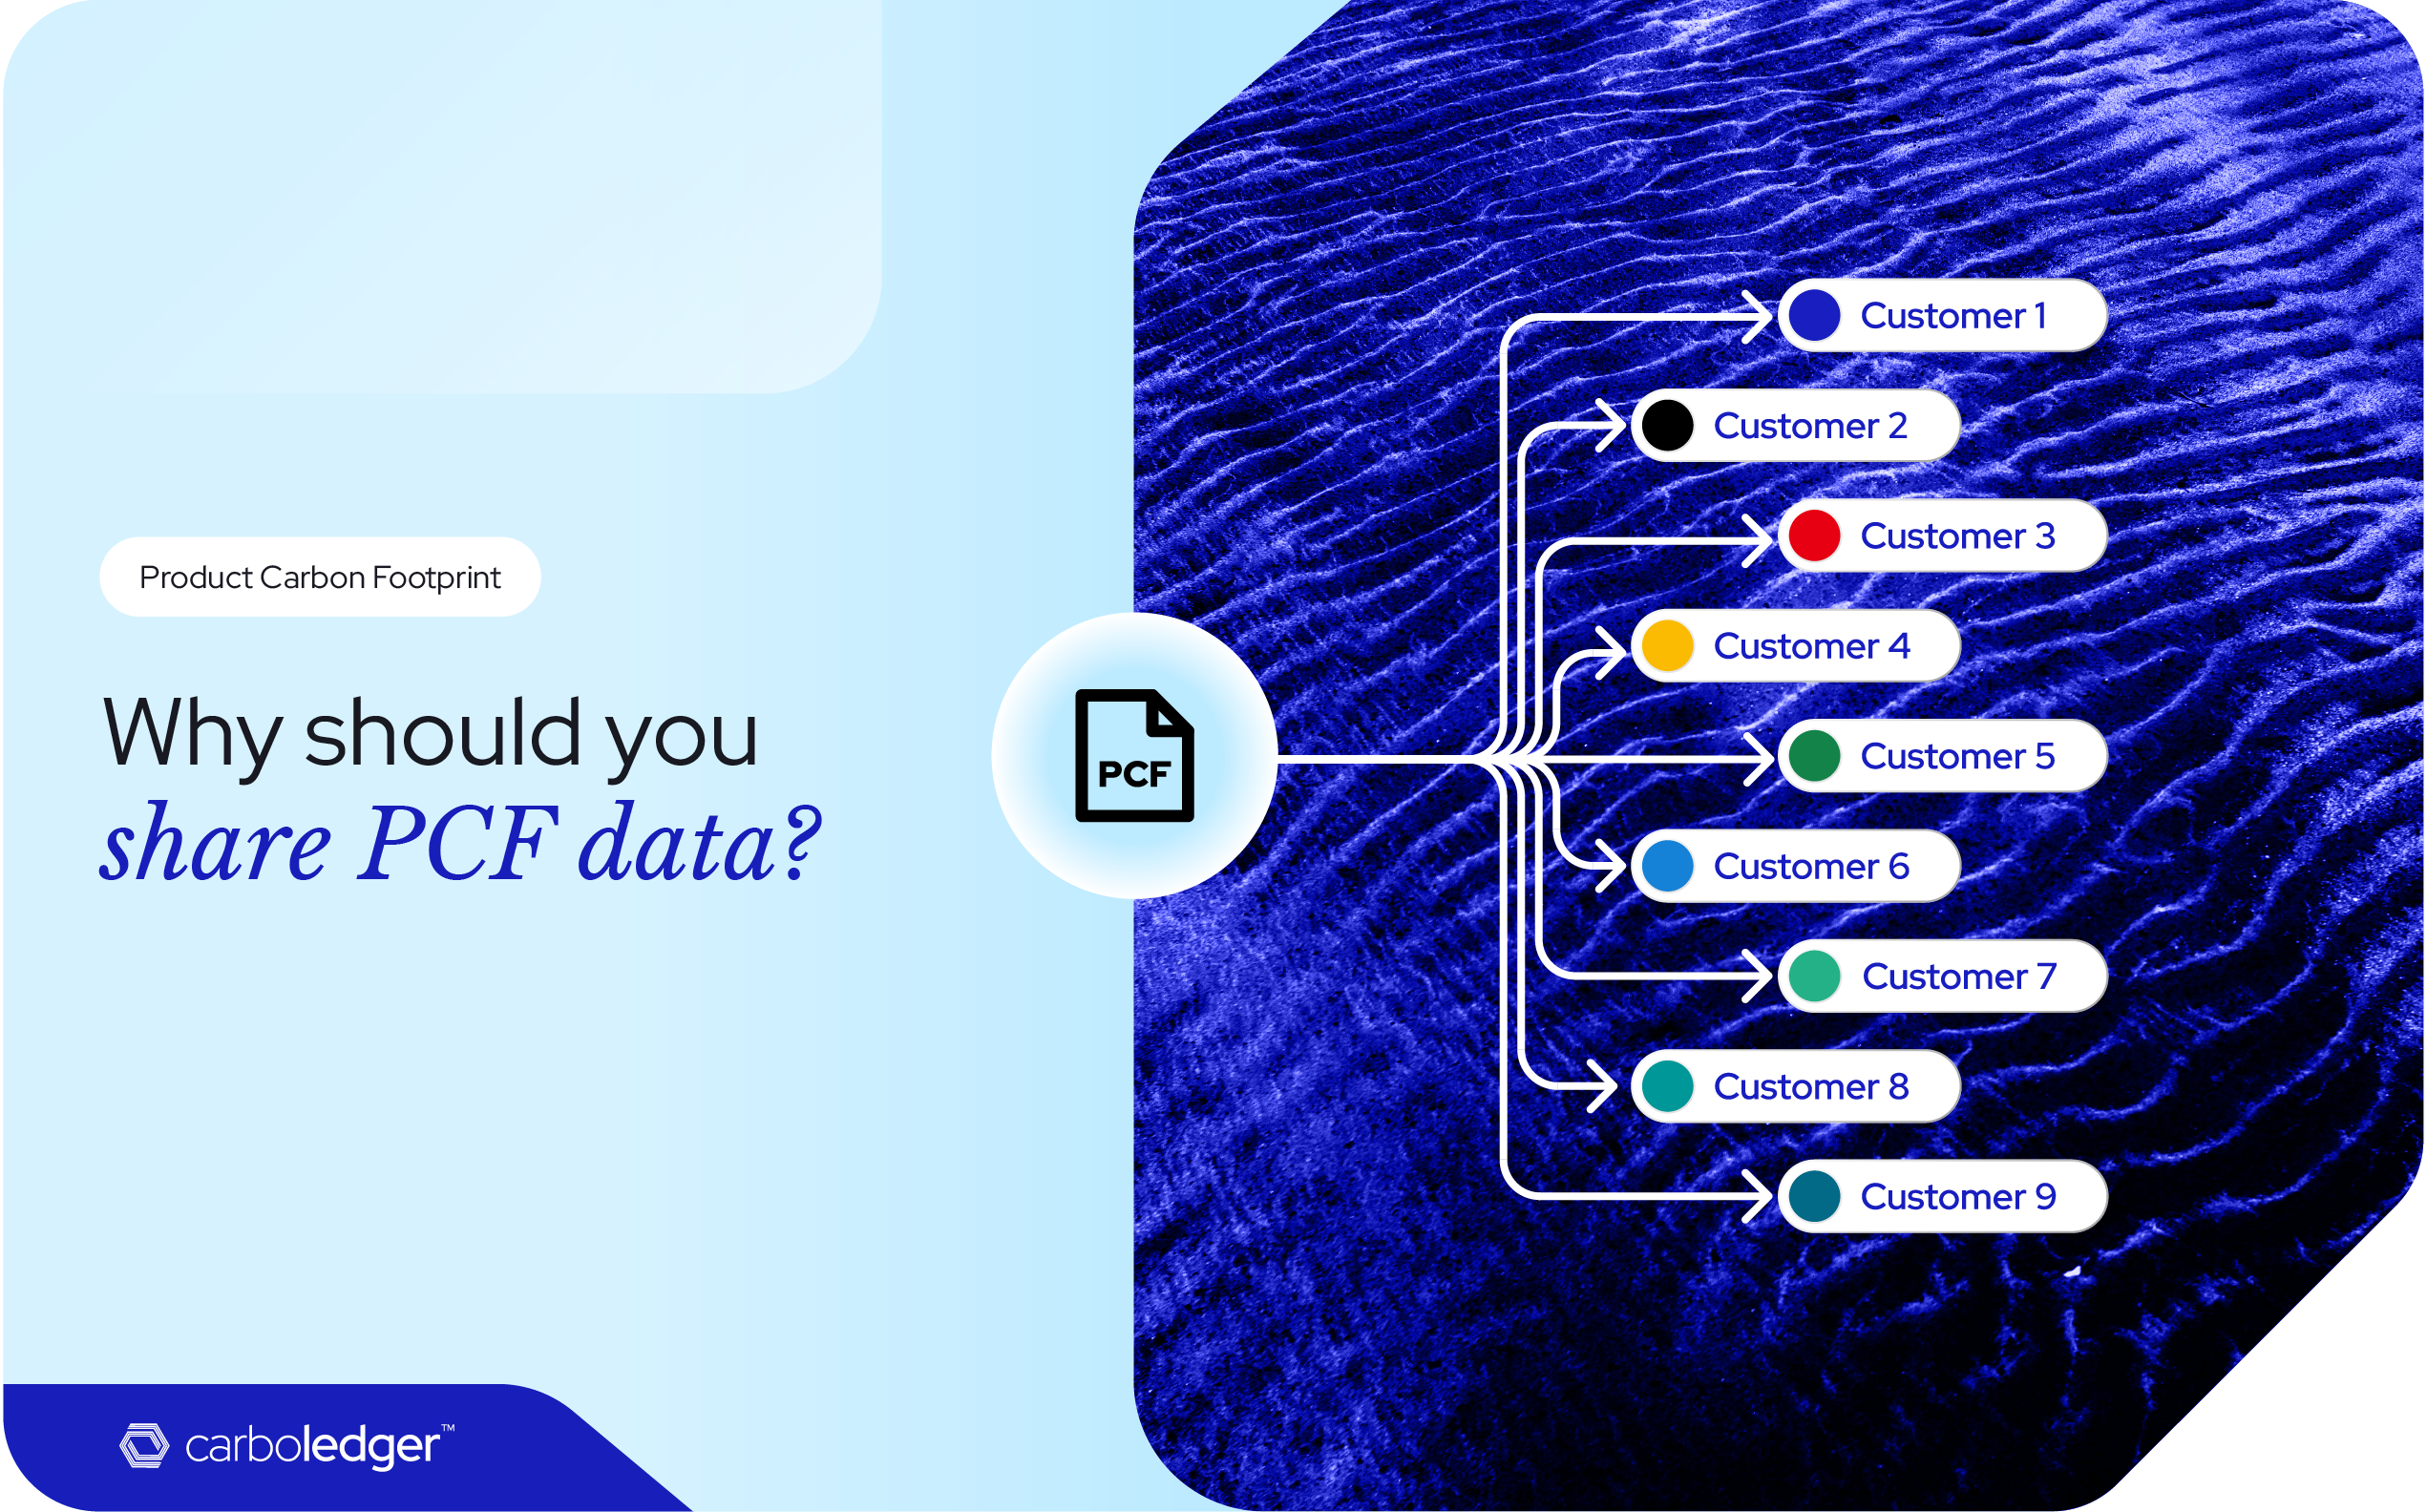 Why should you share your PCF data with your customers?